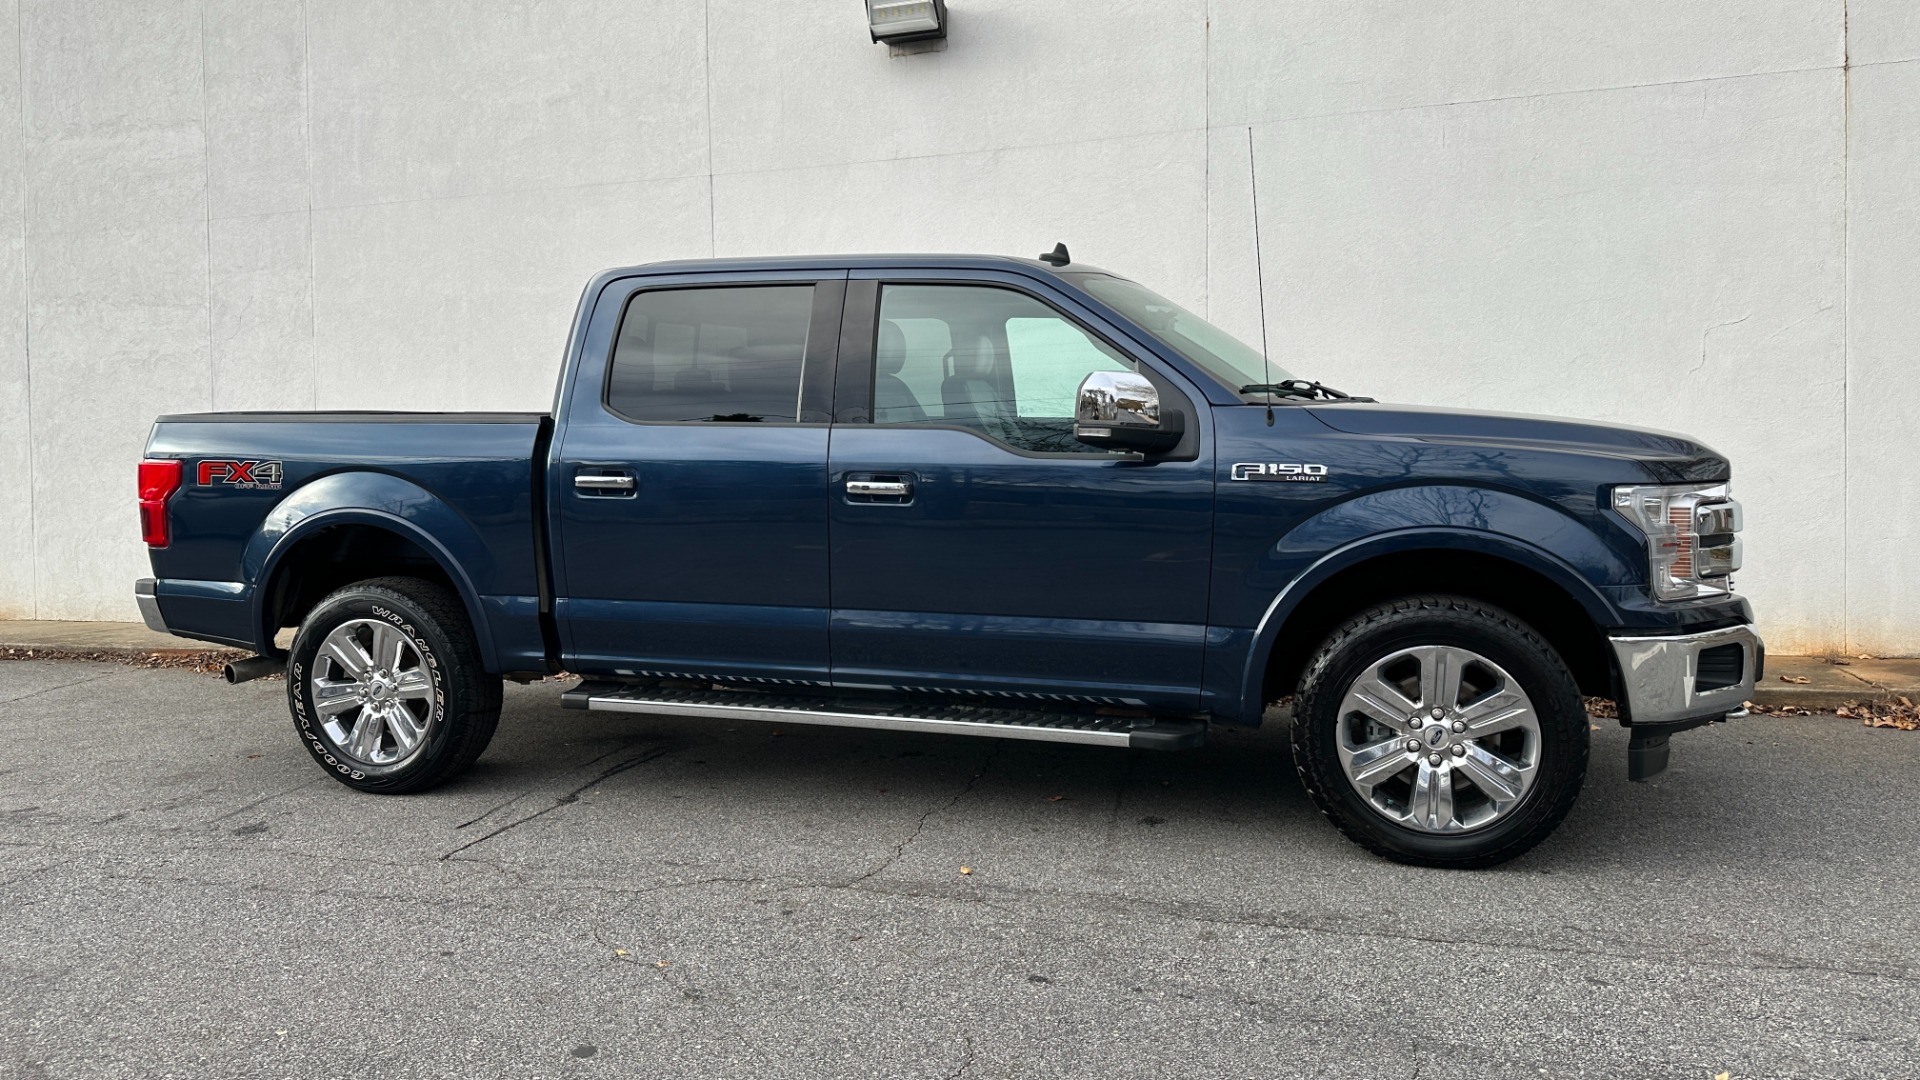 Used 2020 Ford F-150 LARIAT / 3.5L ECOBOOST / FX4 OFFROAD / 20IN WHEELS / PANORAMIC ROOF for sale $45,995 at Formula Imports in Charlotte NC 28227 6